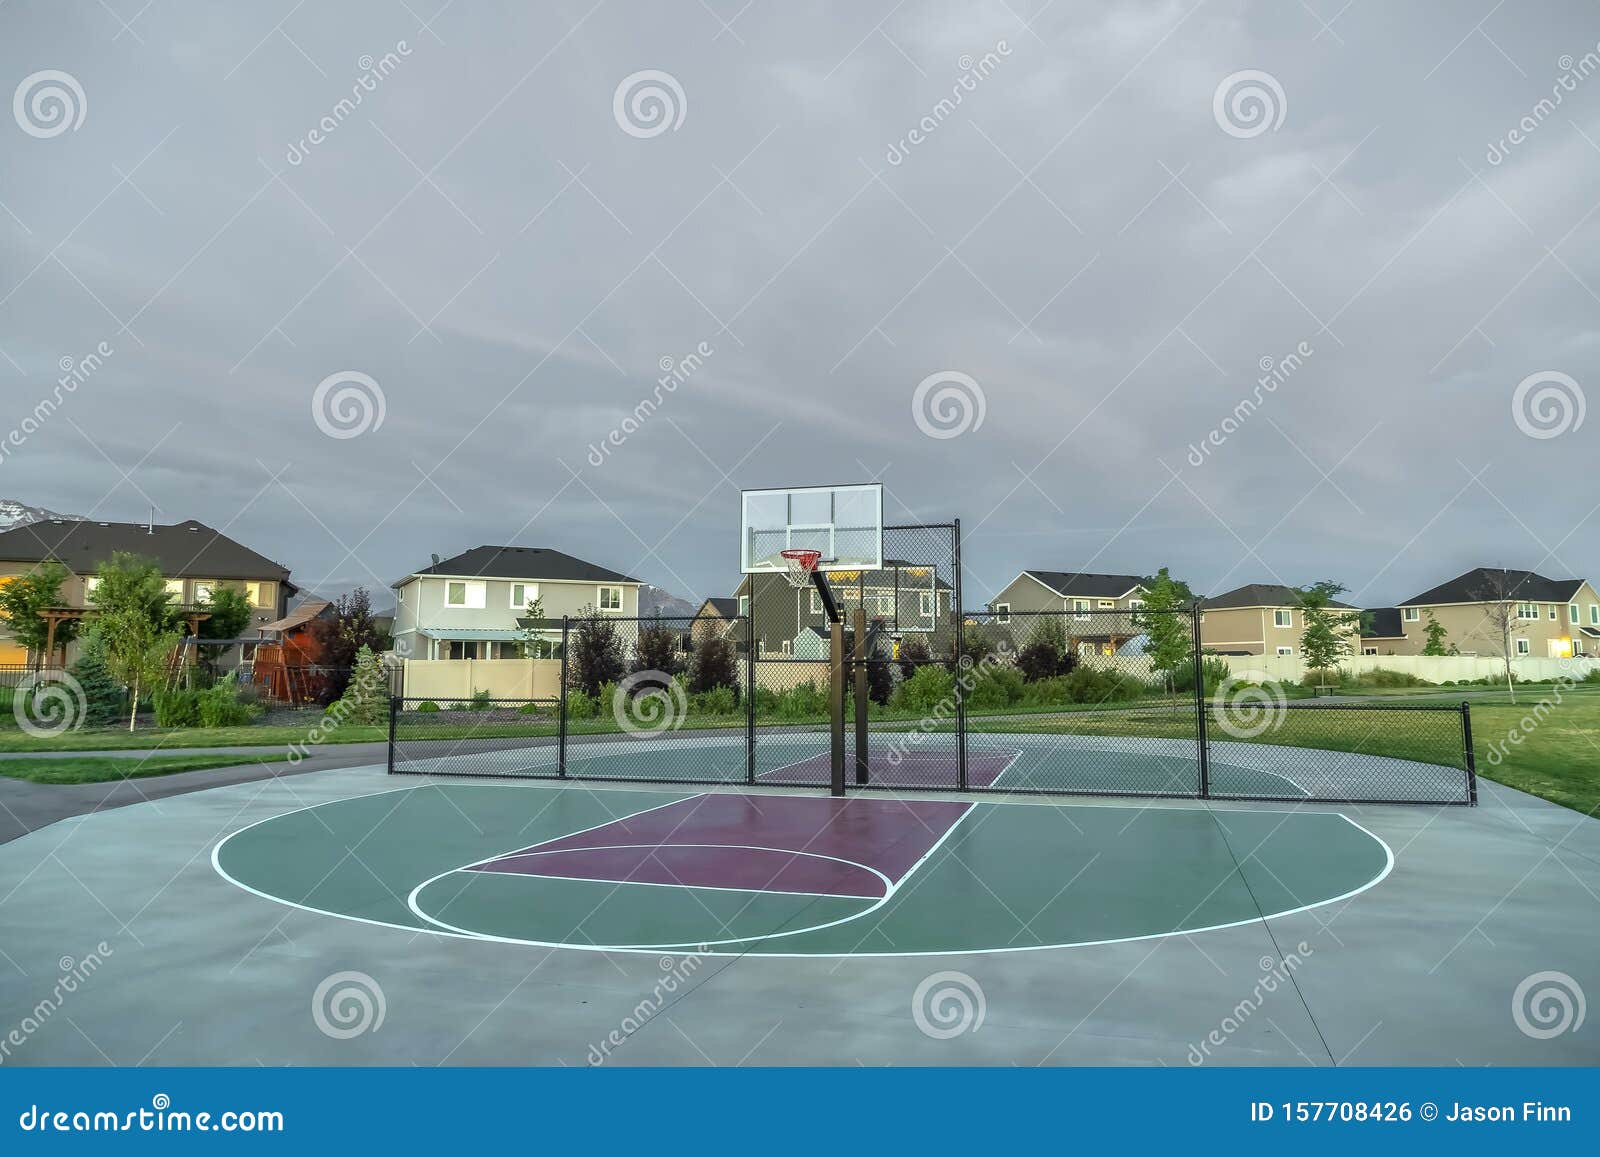 https://thumbs.dreamstime.com/z/basketball-cout-middle-neighborhood-overcast-sky-overhead-multi-storey-family-homes-can-be-seen-background-157708426.jpg